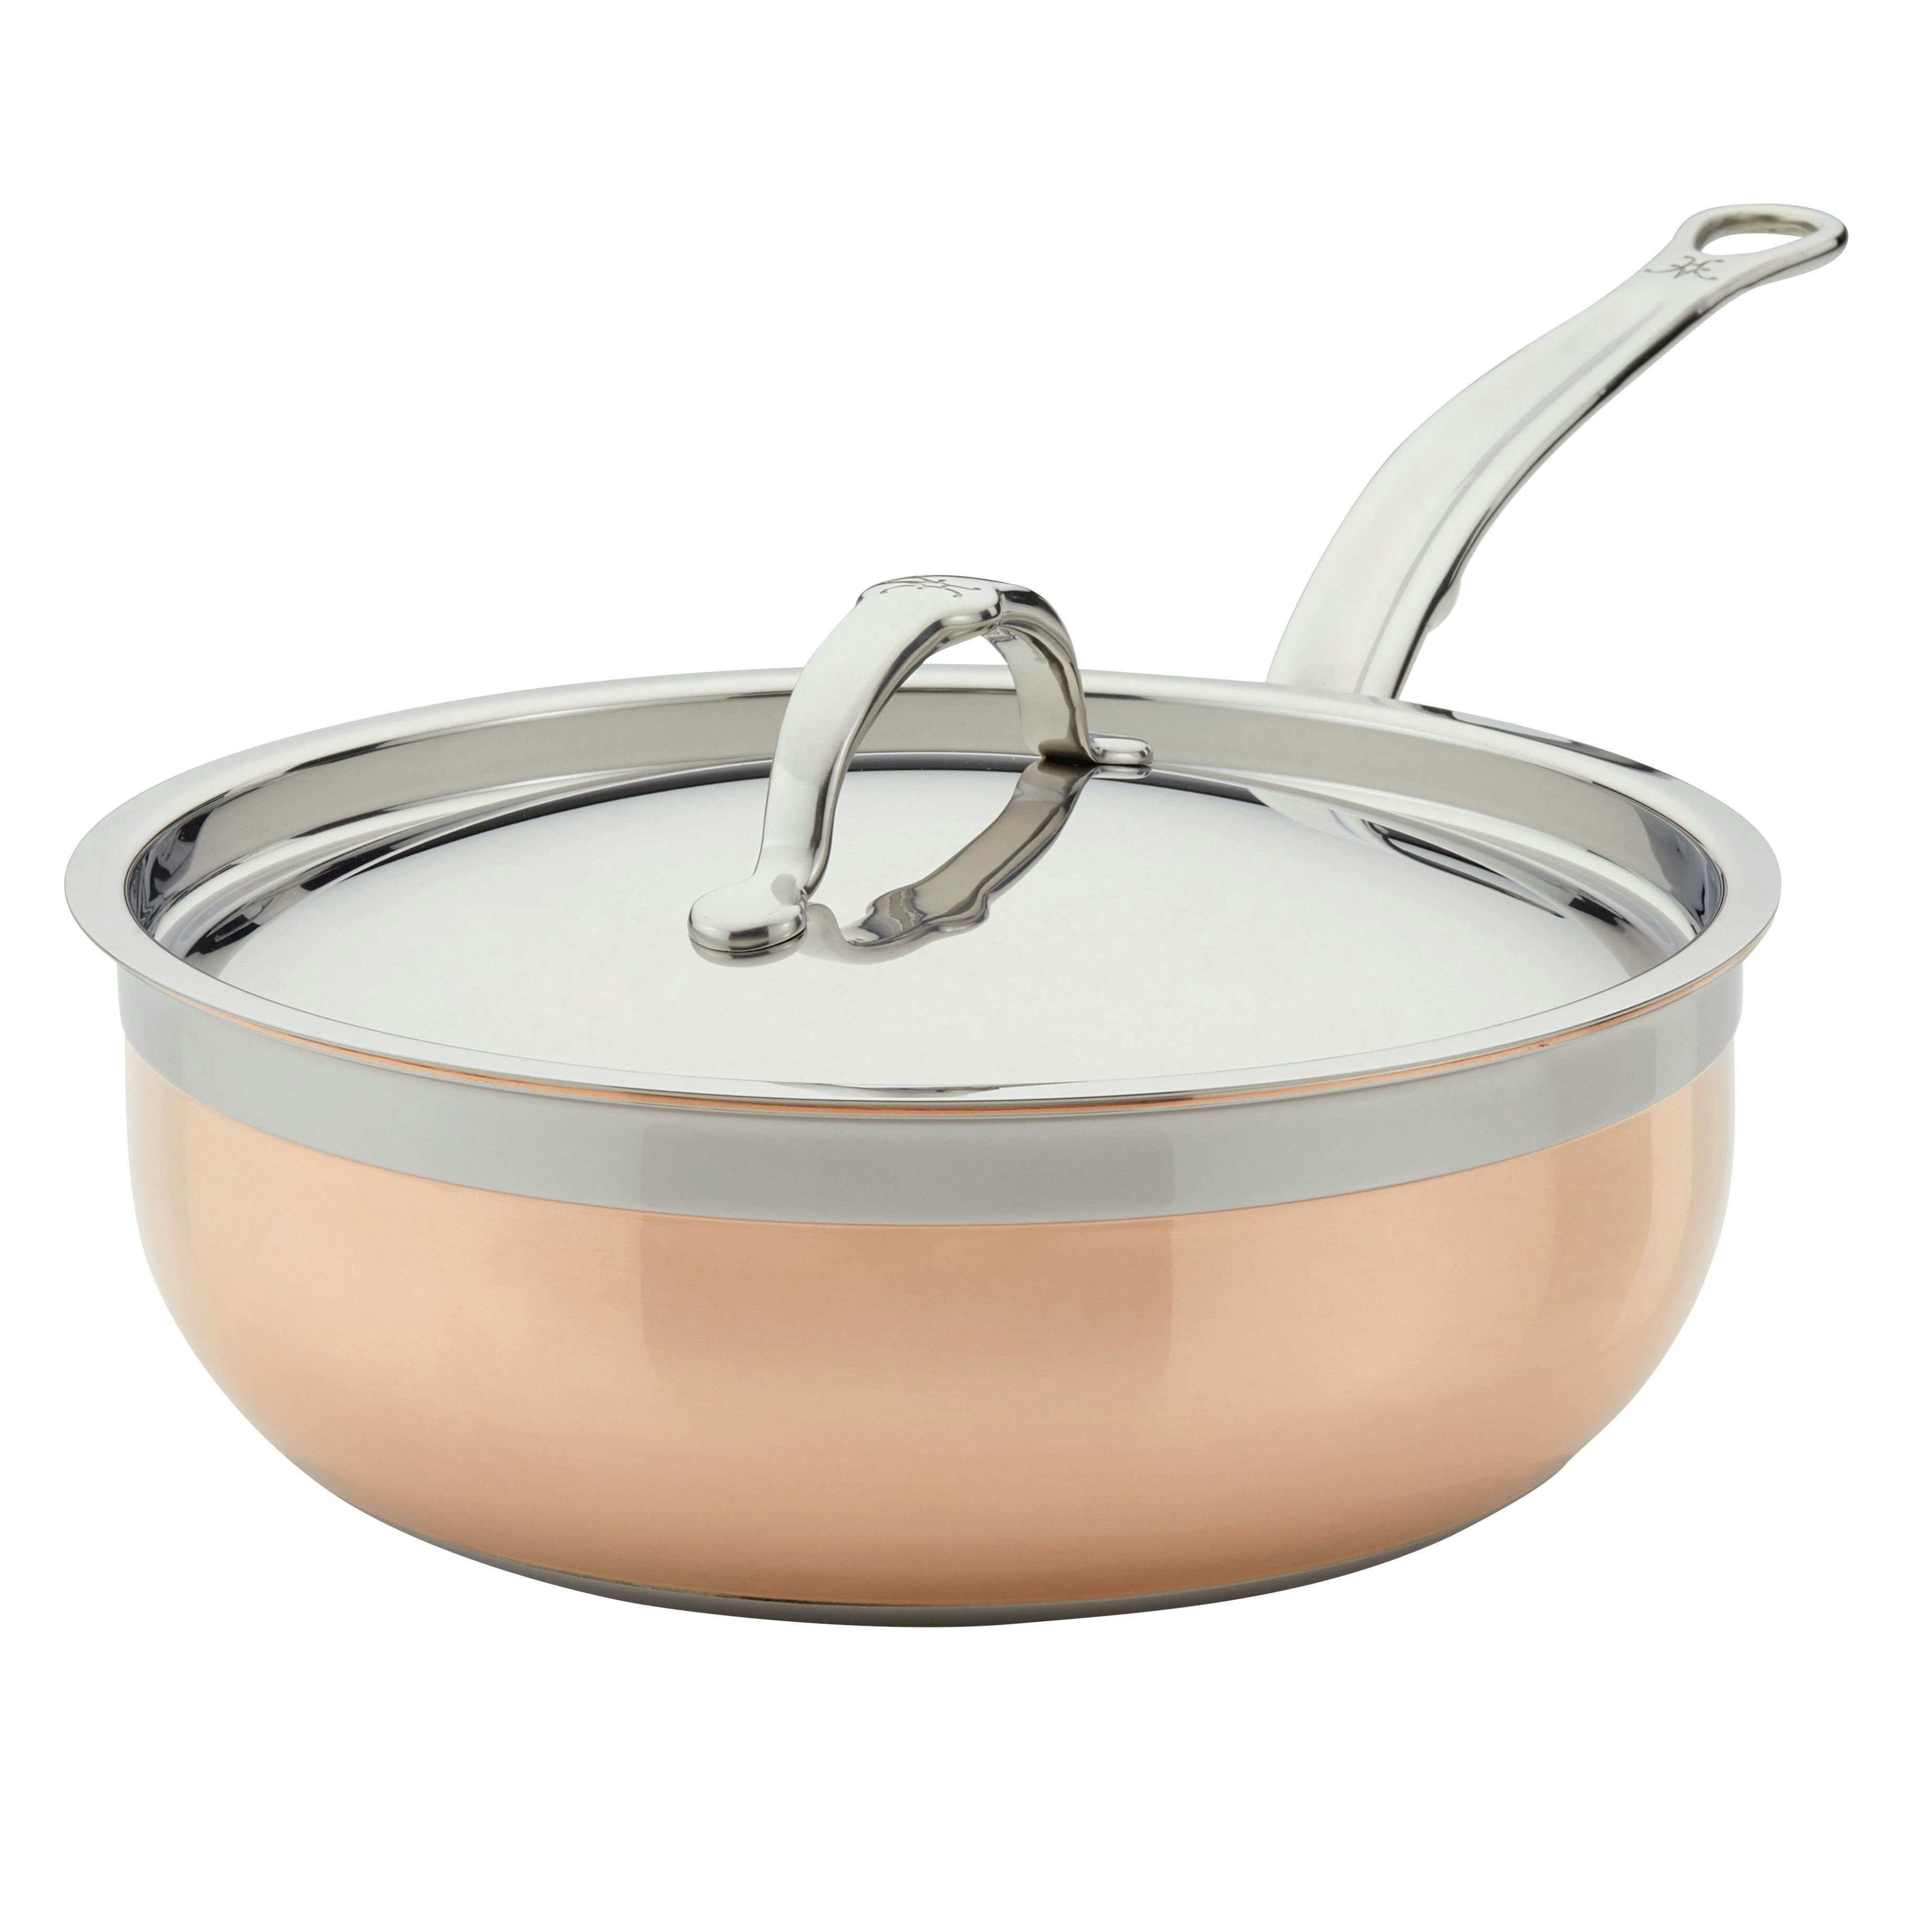 Hestan CopperBond Induction Copper 3.5QT Covered Essential Pan